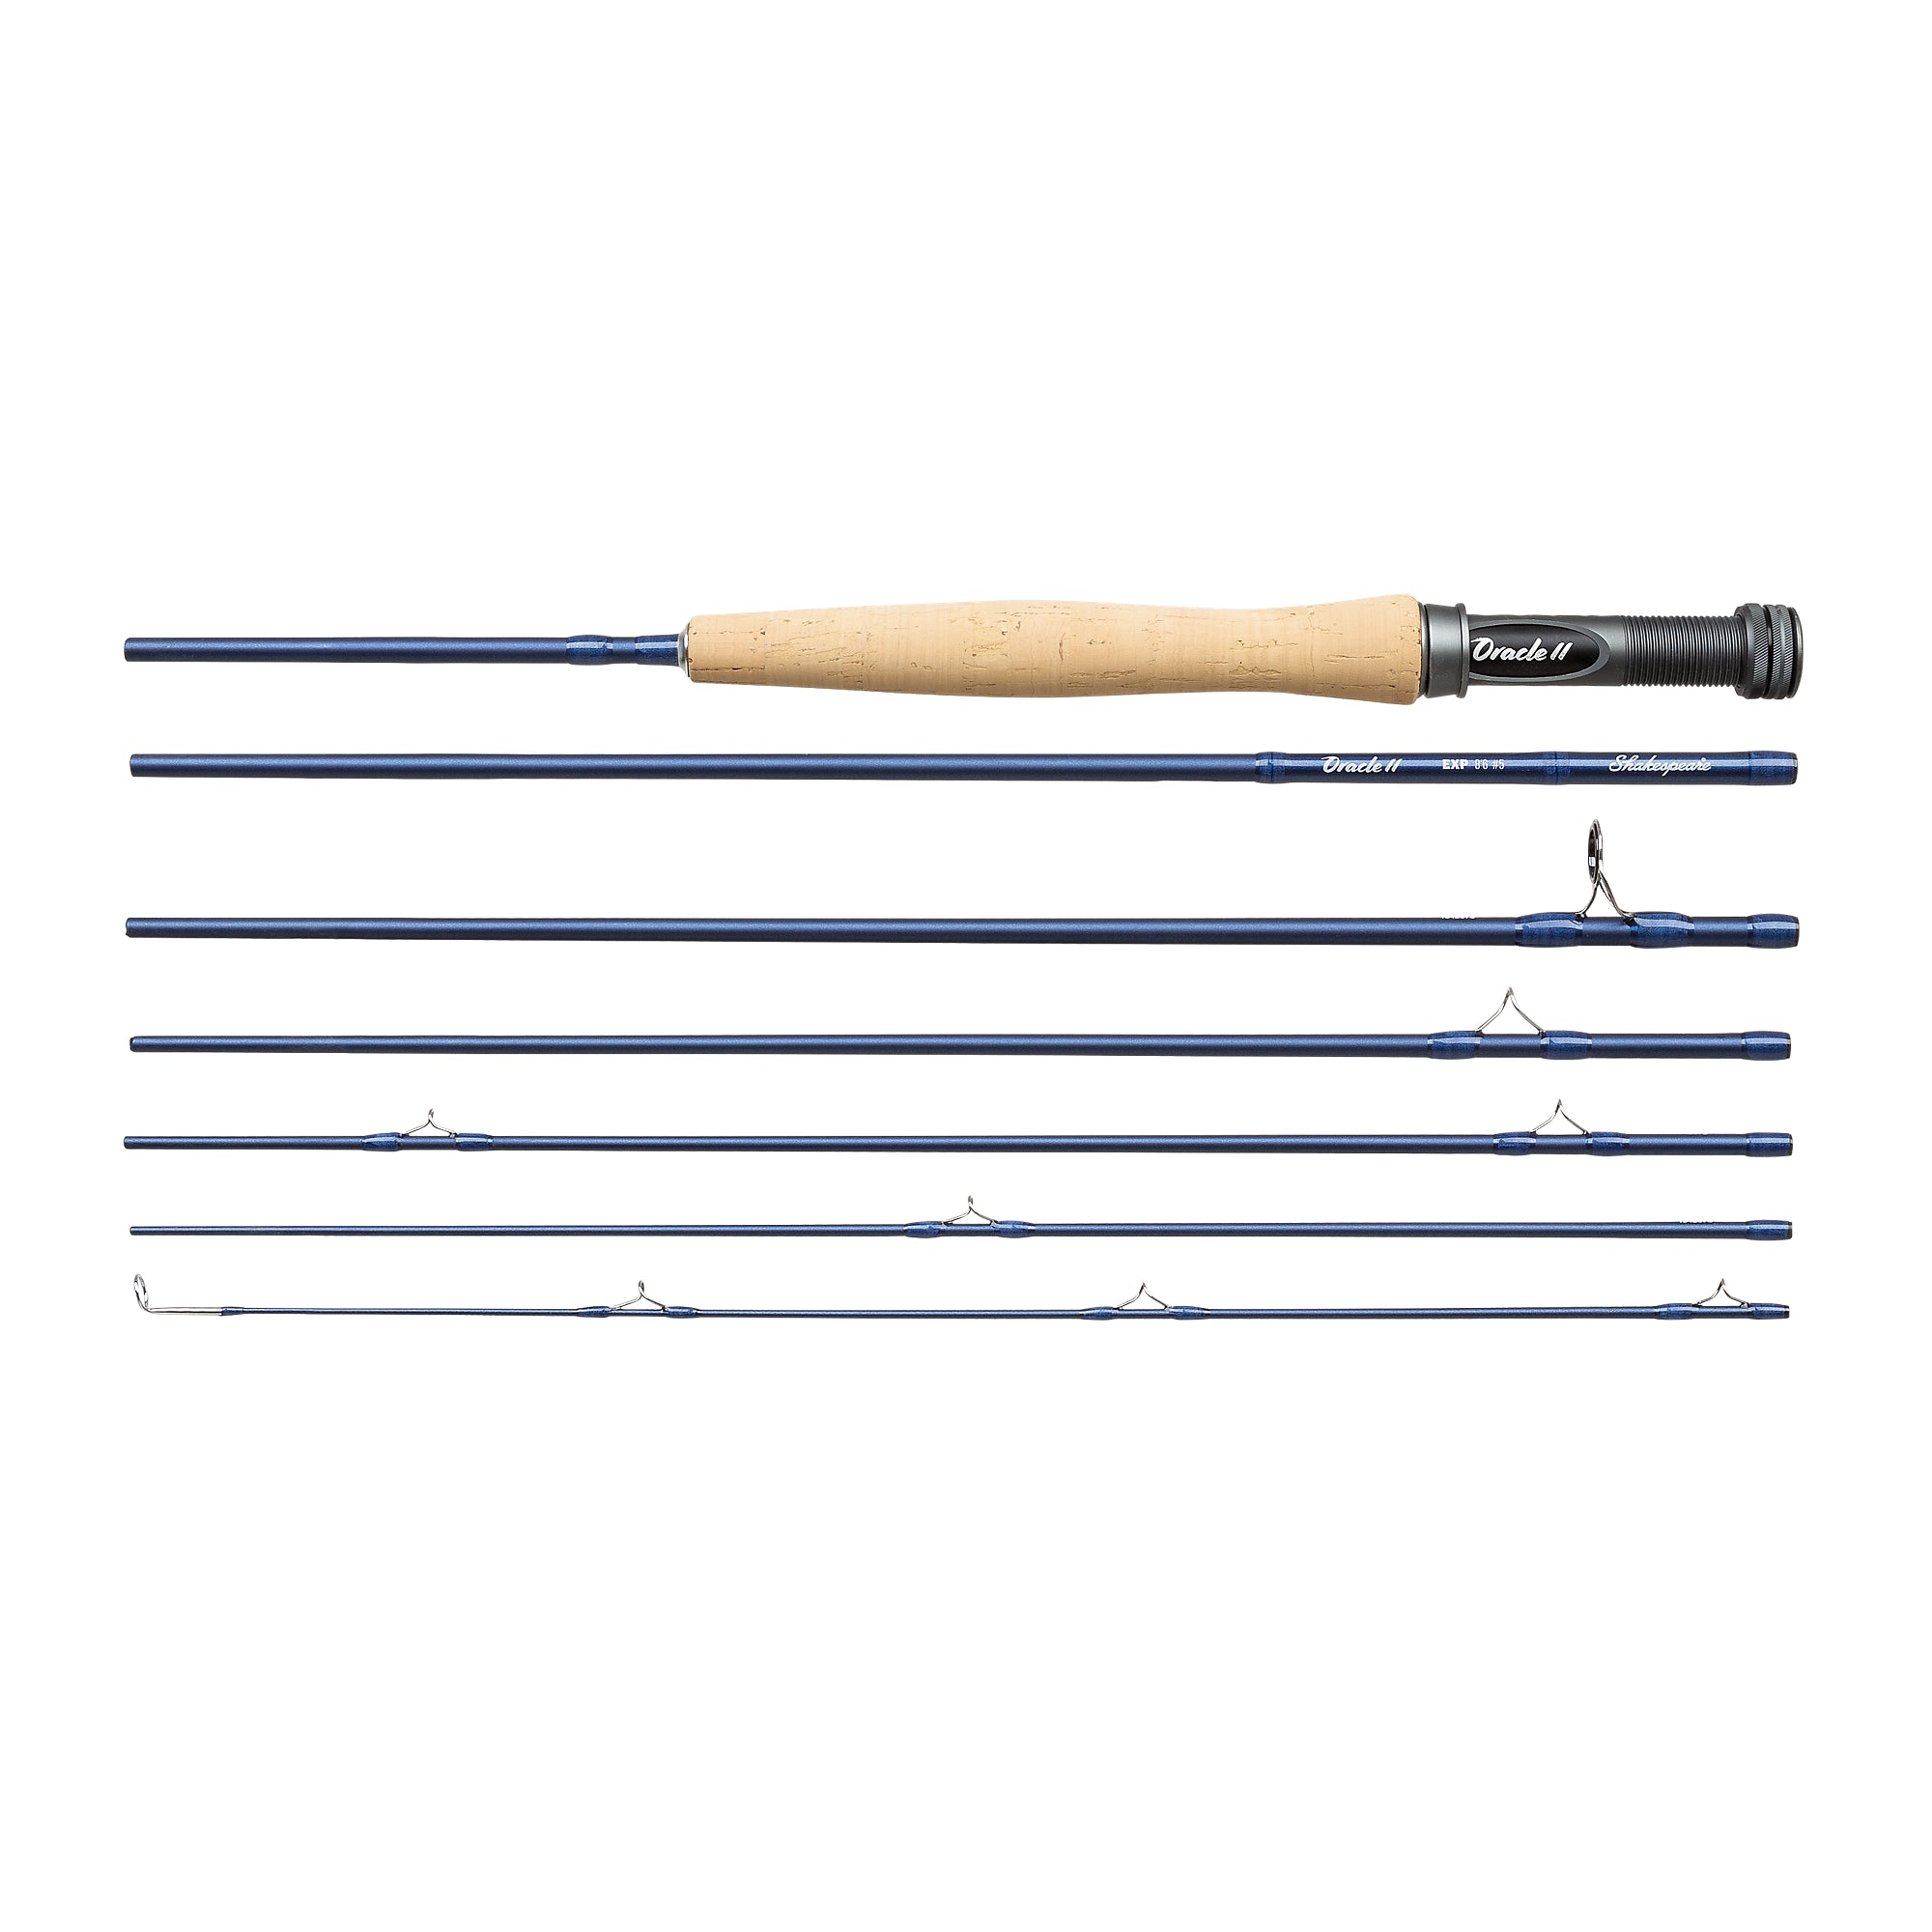 SHAKESPEARE ORACLE 2 EXP FLY RODS